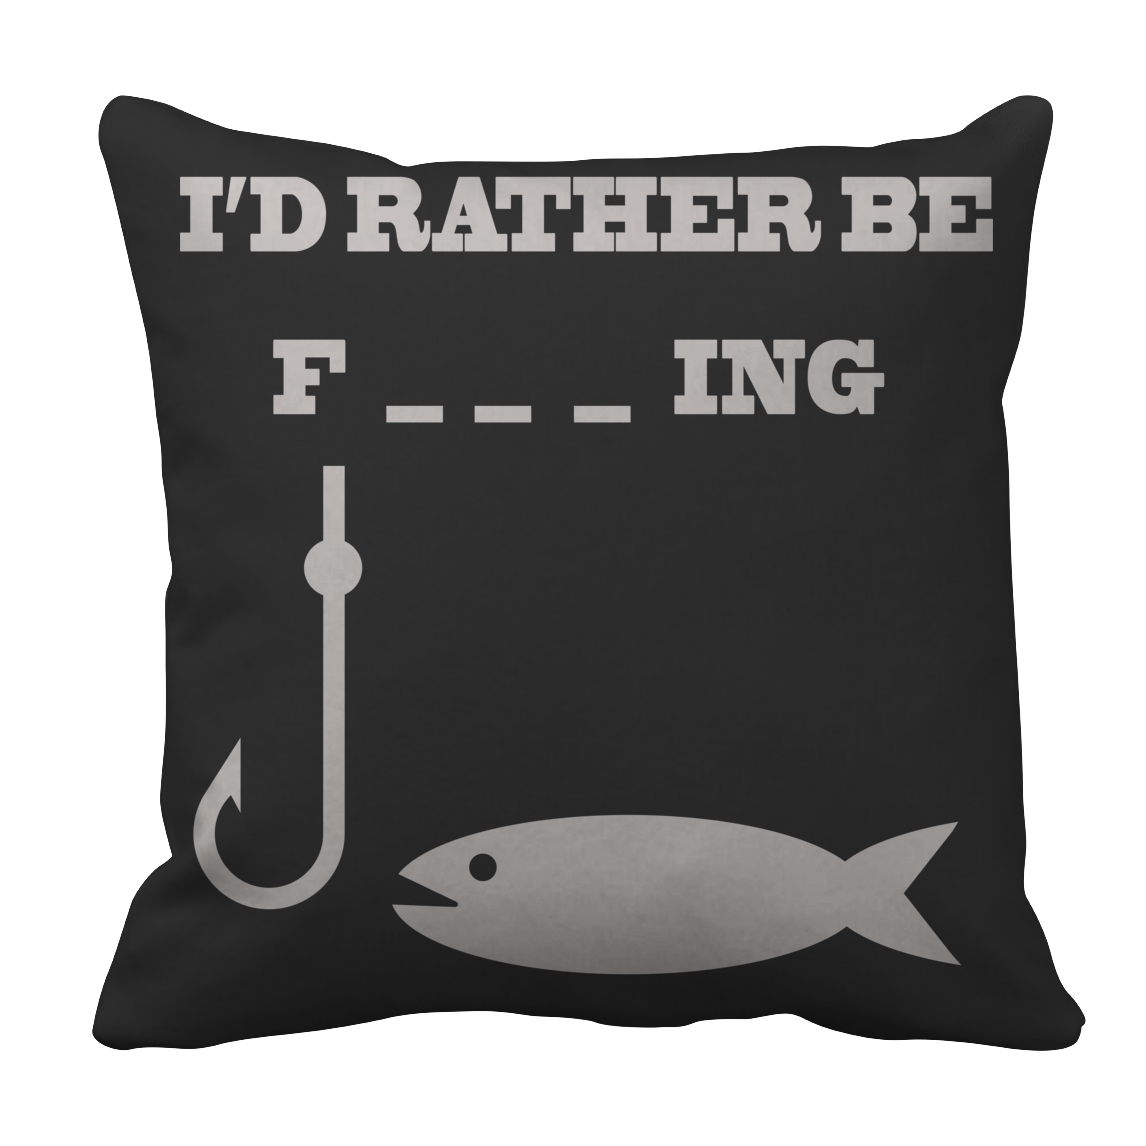 Limited Edition - I'd Rather Be F___ing